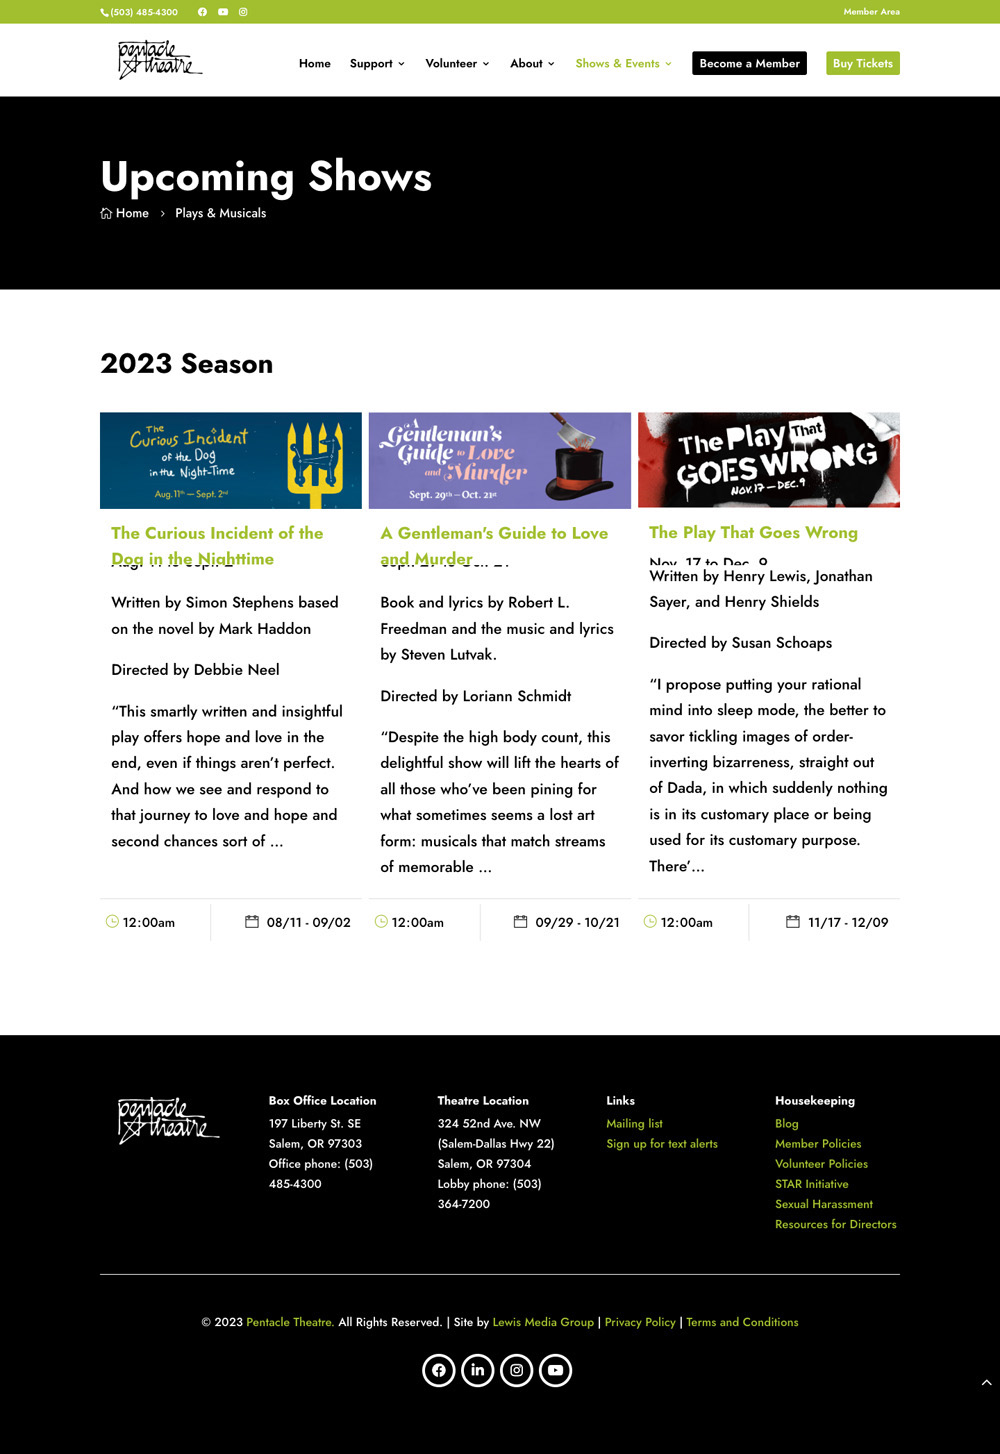 Snapshot of the Shows page on Pentacle Theatre after the redesign